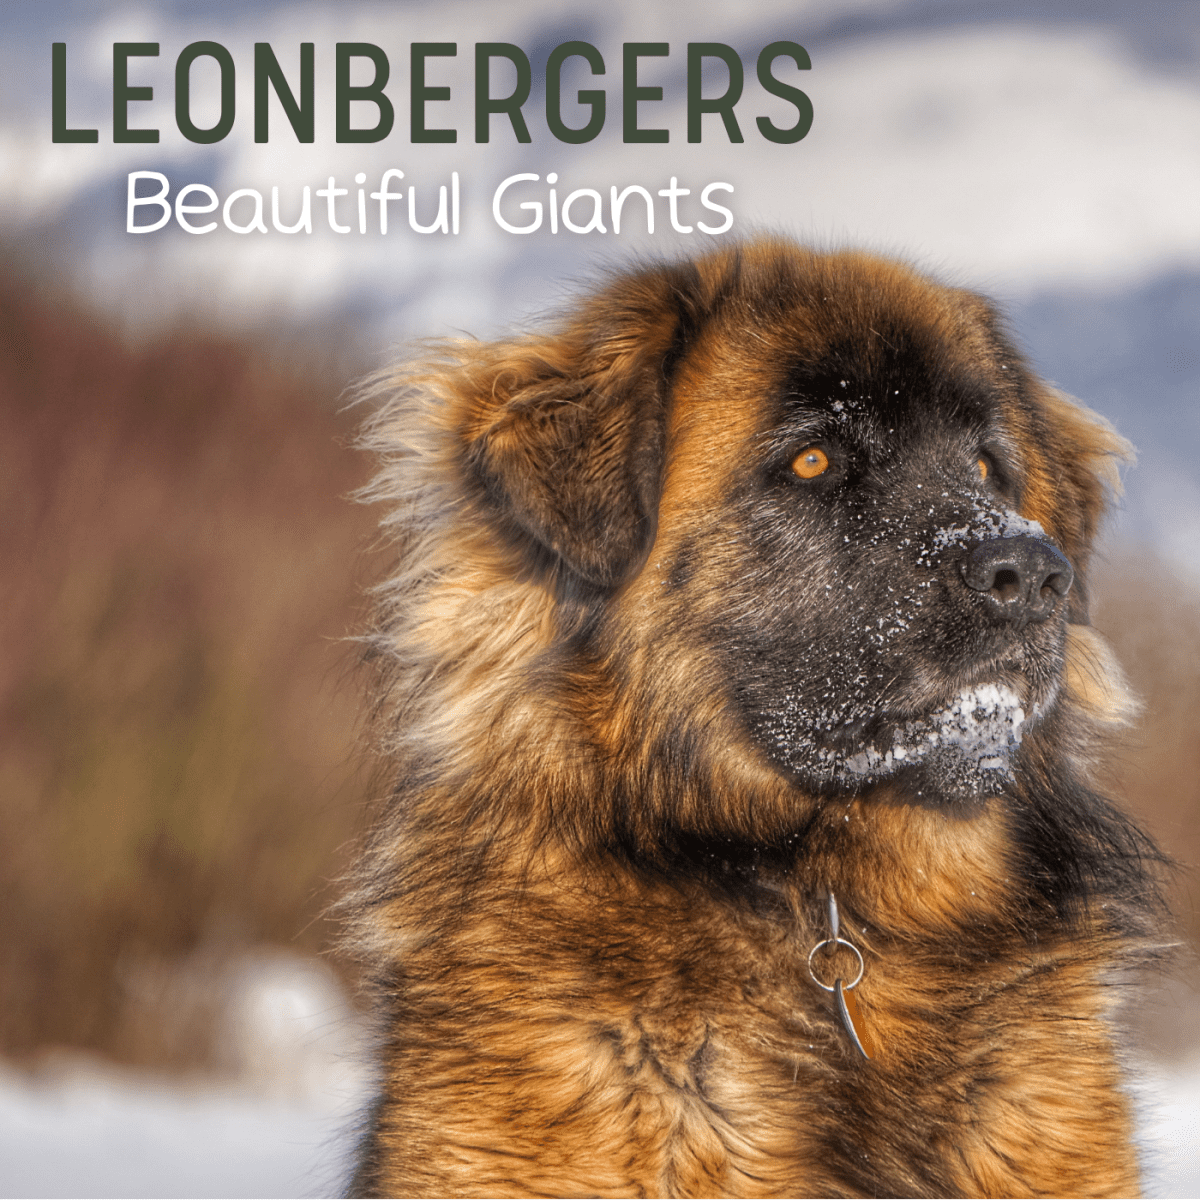 Leonberger: One of the Largest Dogs in the World - PetHelpful